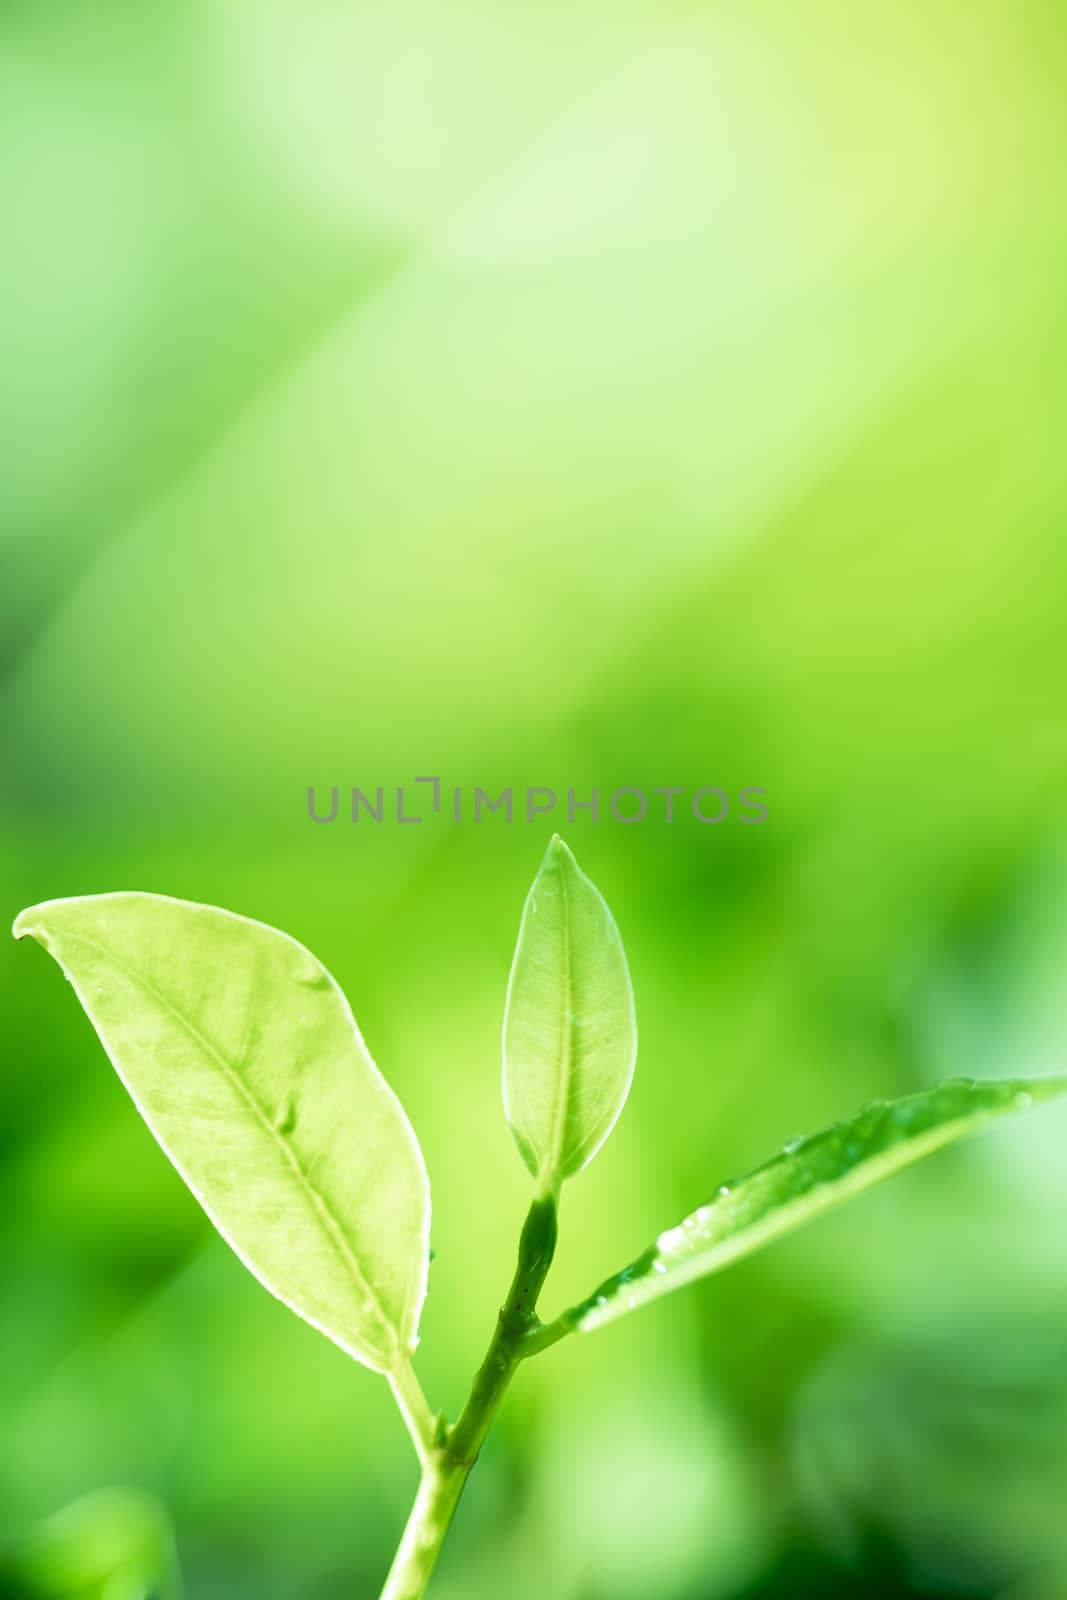 Leaves close up nature view of green leaf on blurred greenery ba by photosam